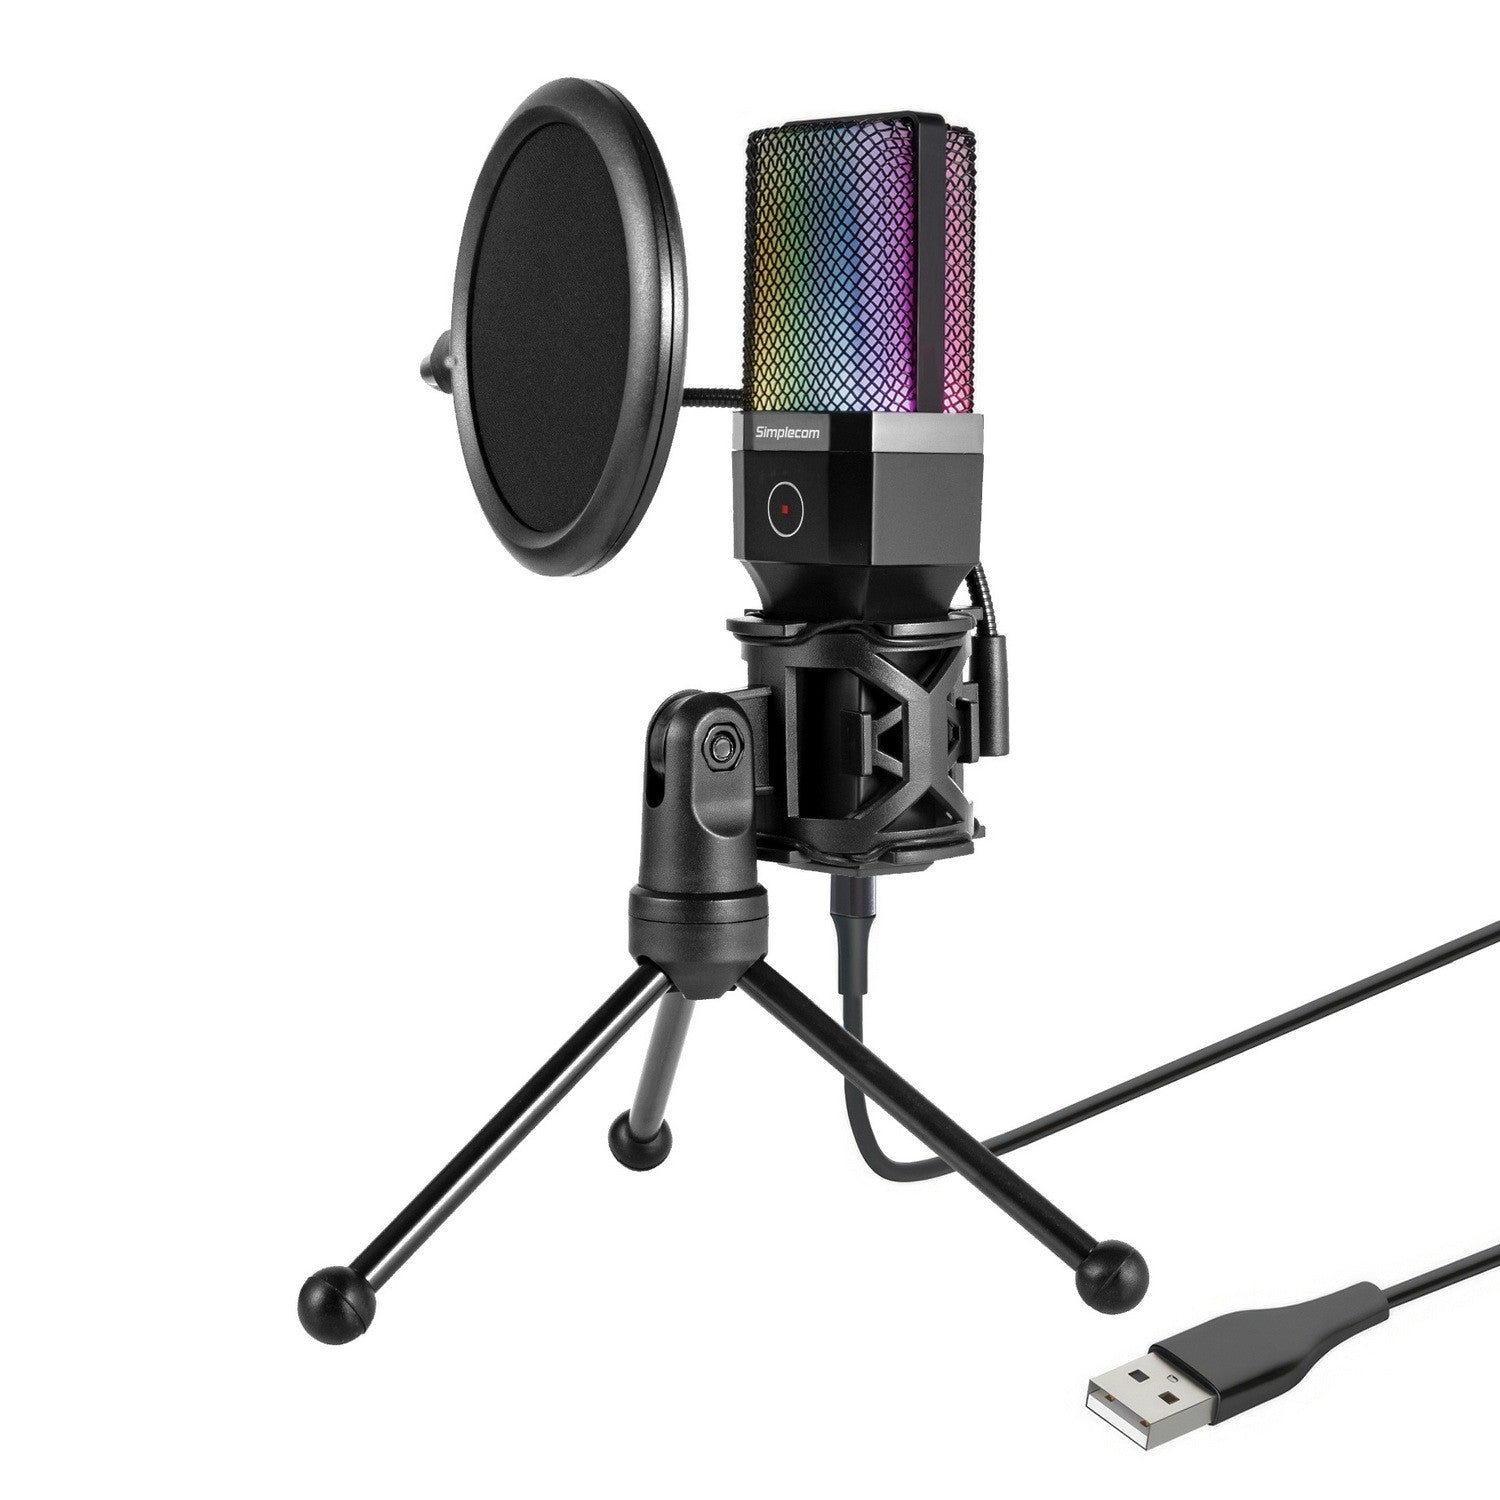 Simplecom USB Cardioid Condenser Microphone Gaming RGB Lights with Tripod & Pop Filter